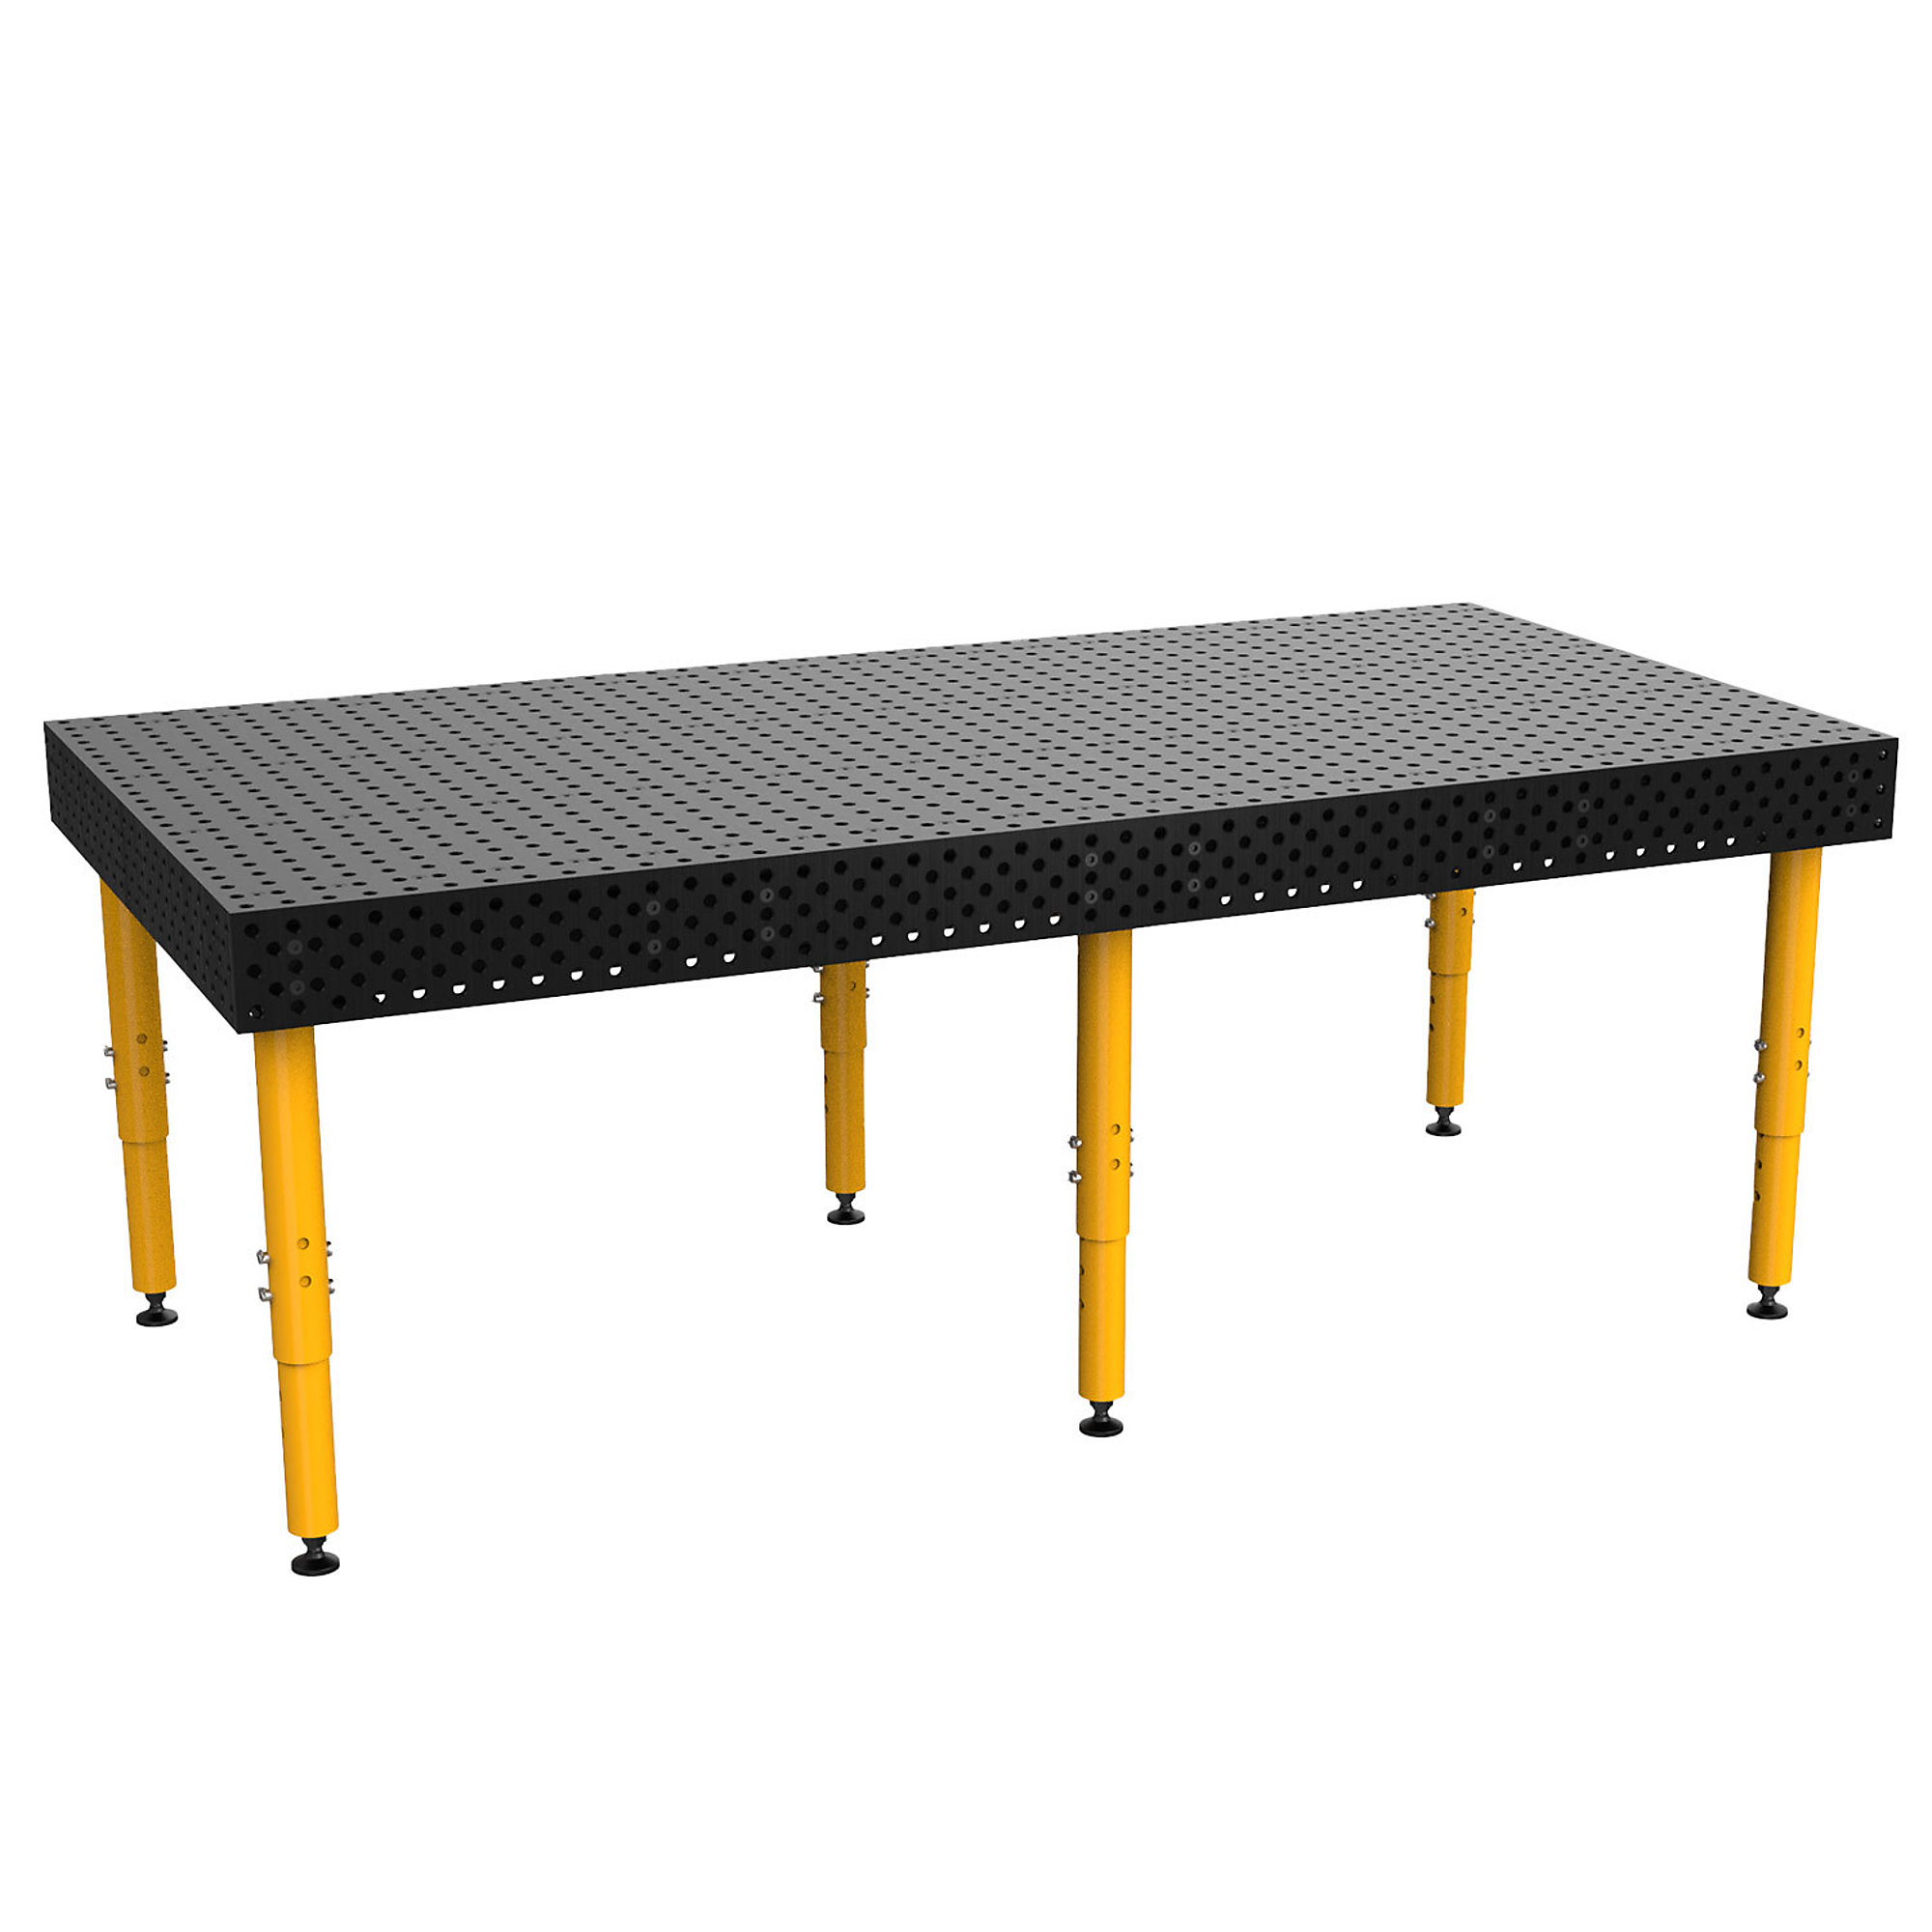 Strong Hand Tools 1500lb Buildpro Welding Table - 96Inch x 48Inch, Model TA5-9648Q-B1